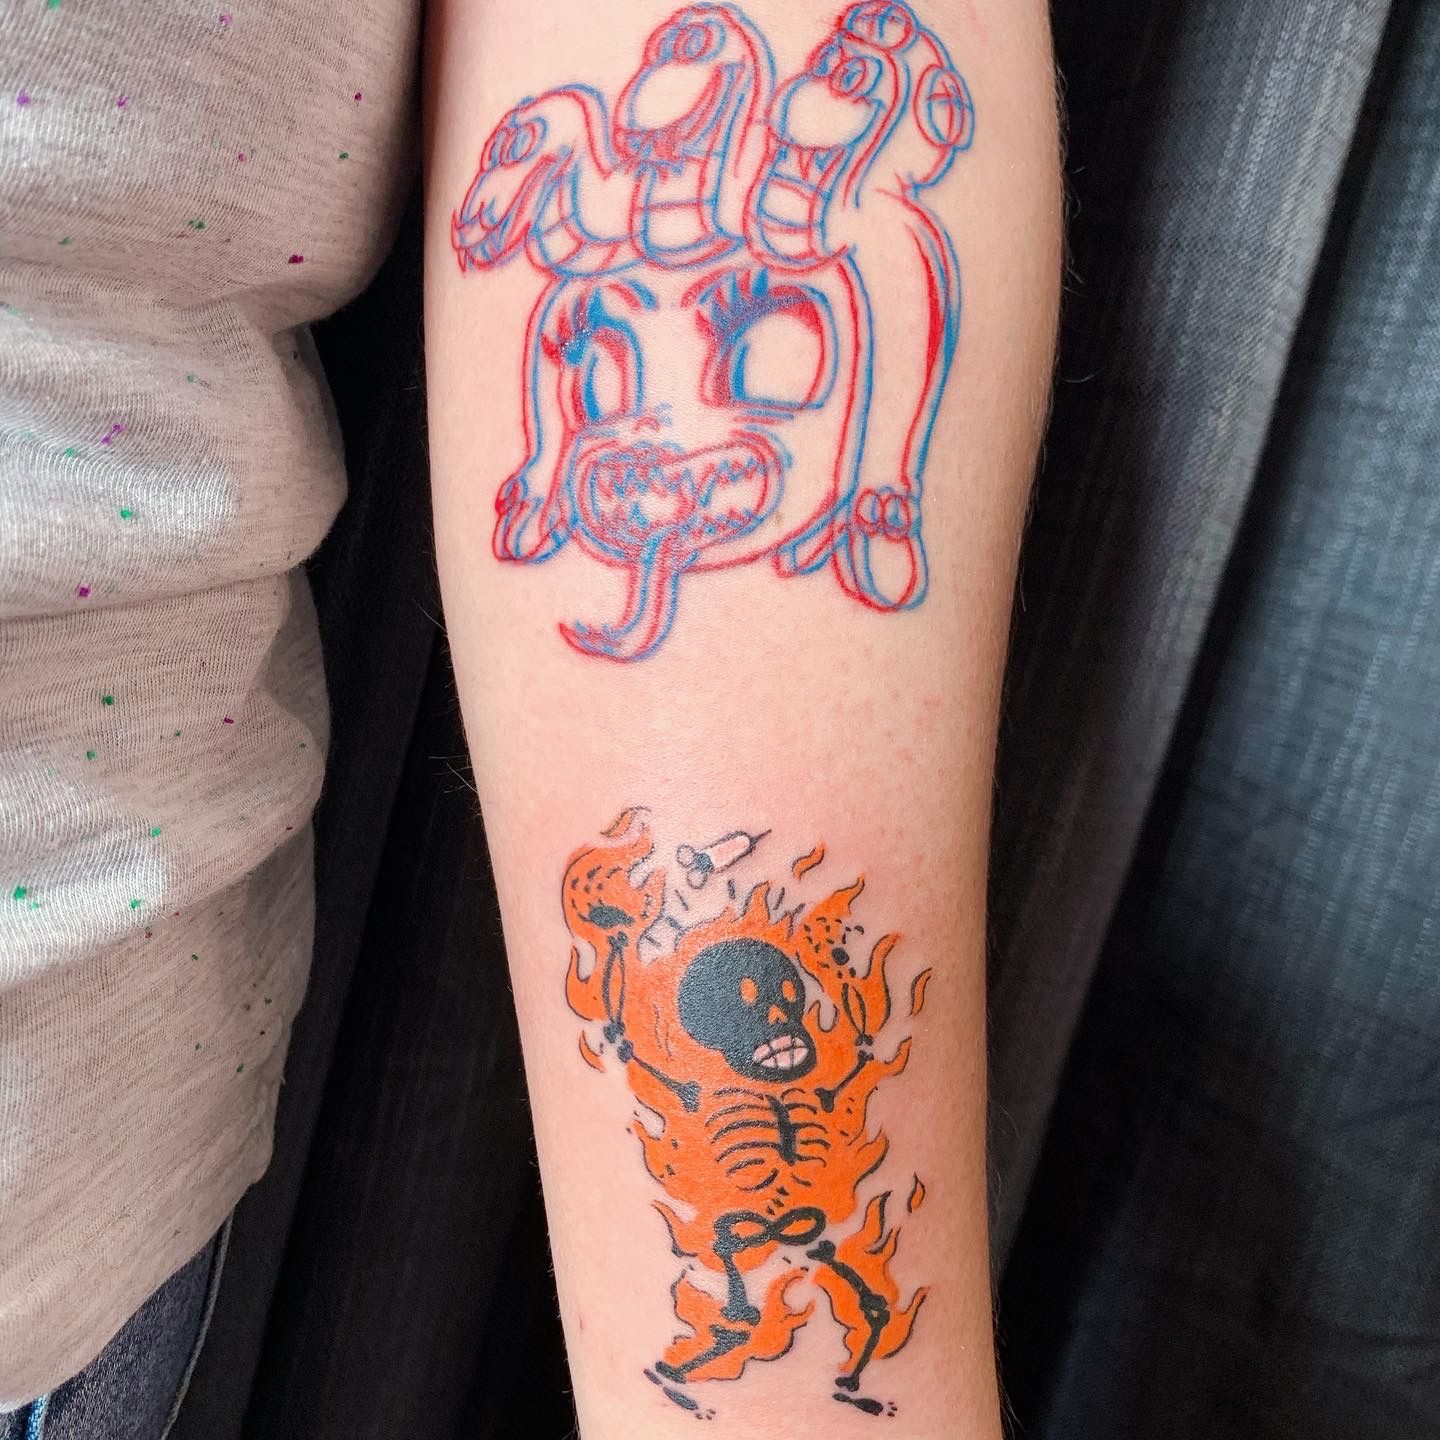 Got the devil today and cuphead got touched up  rCuphead